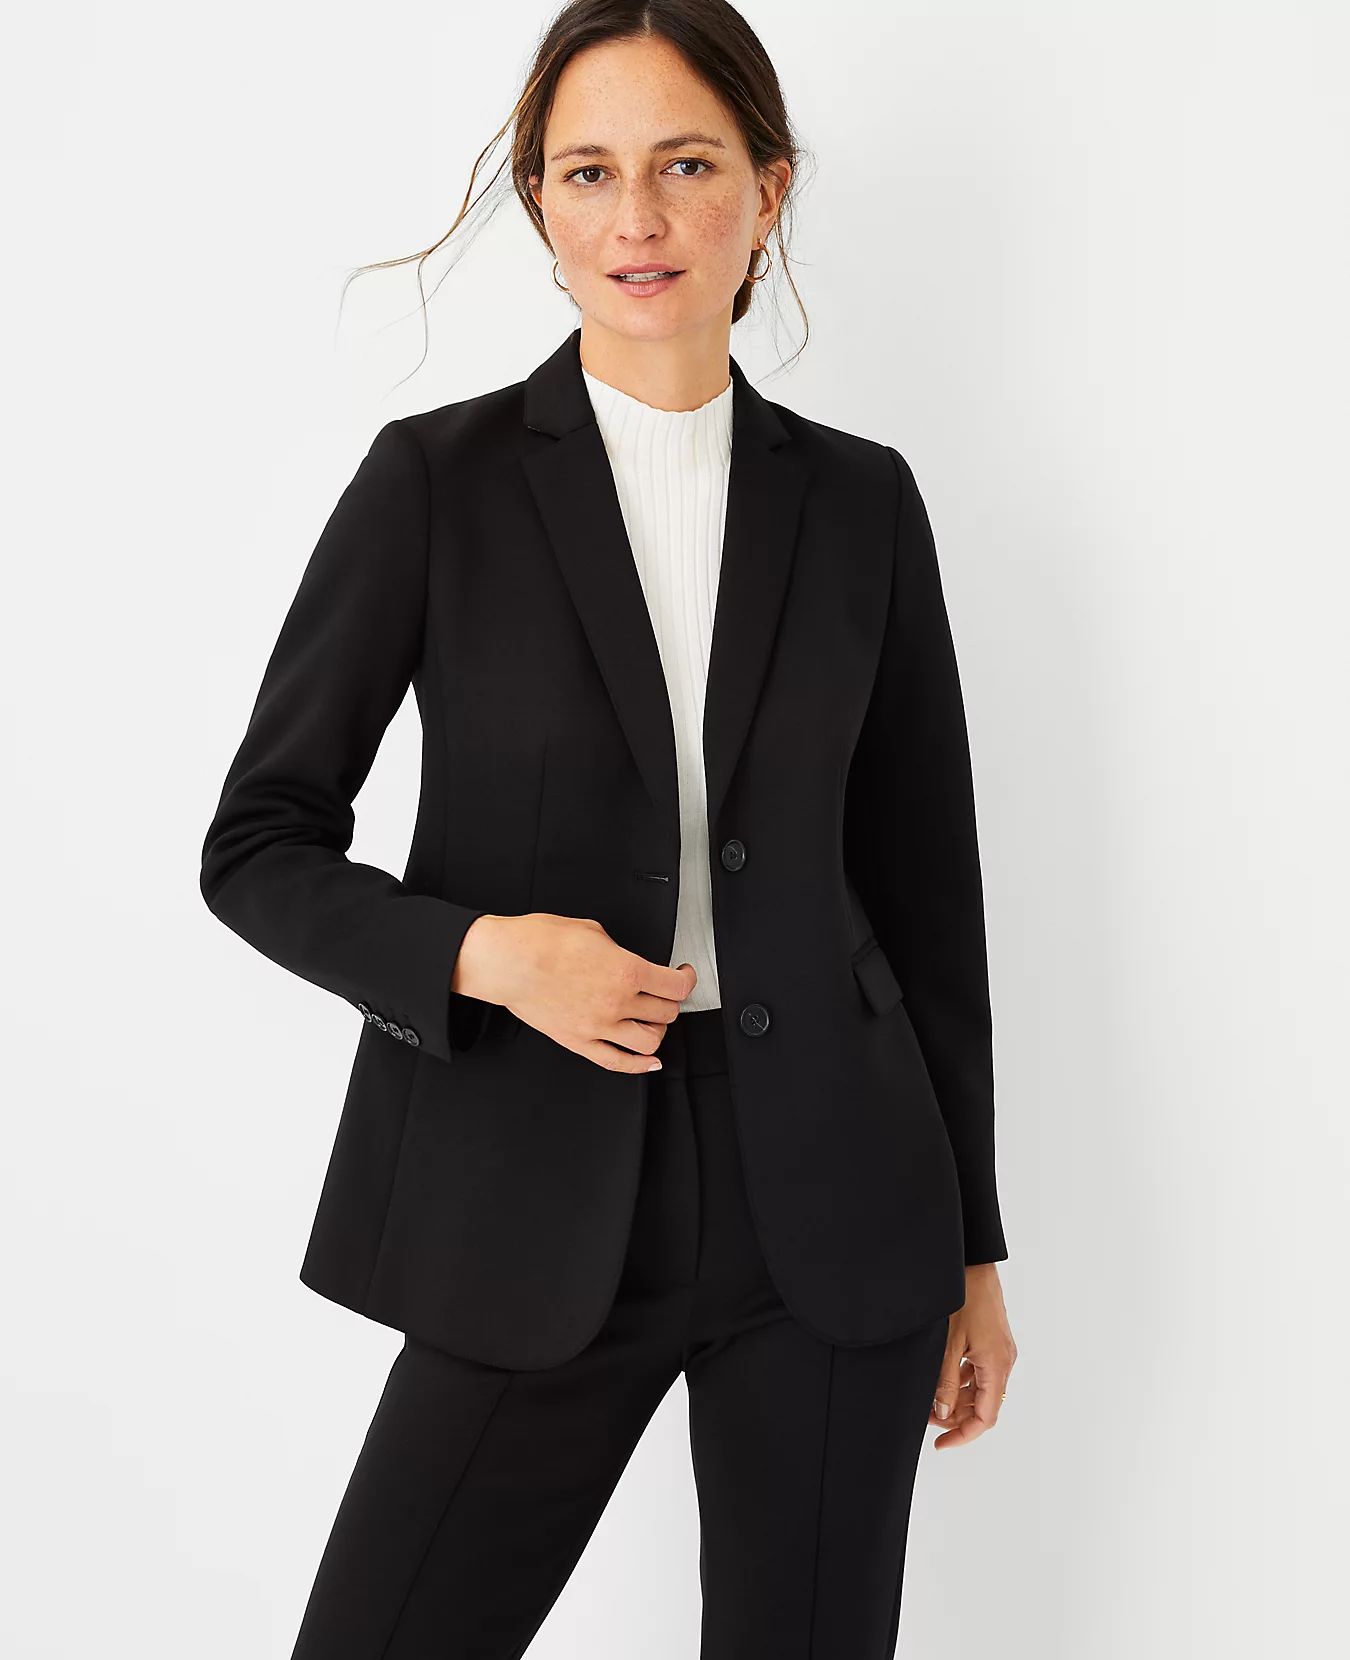 The Two Button Blazer in Double Knit | Ann Taylor | Ann Taylor (US)